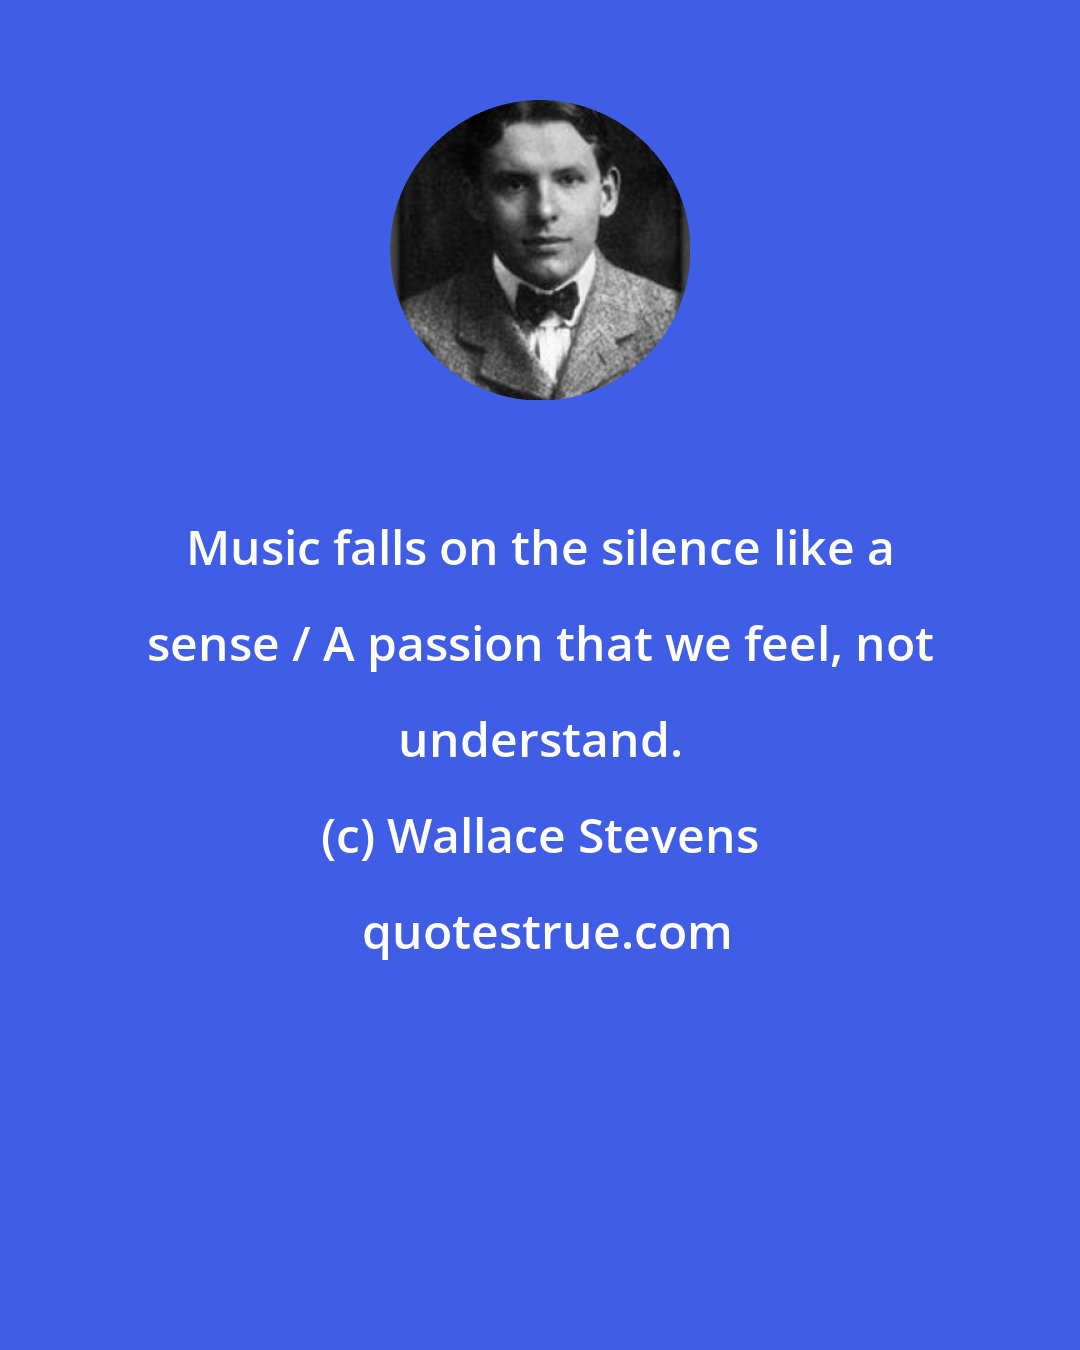 Wallace Stevens: Music falls on the silence like a sense / A passion that we feel, not understand.